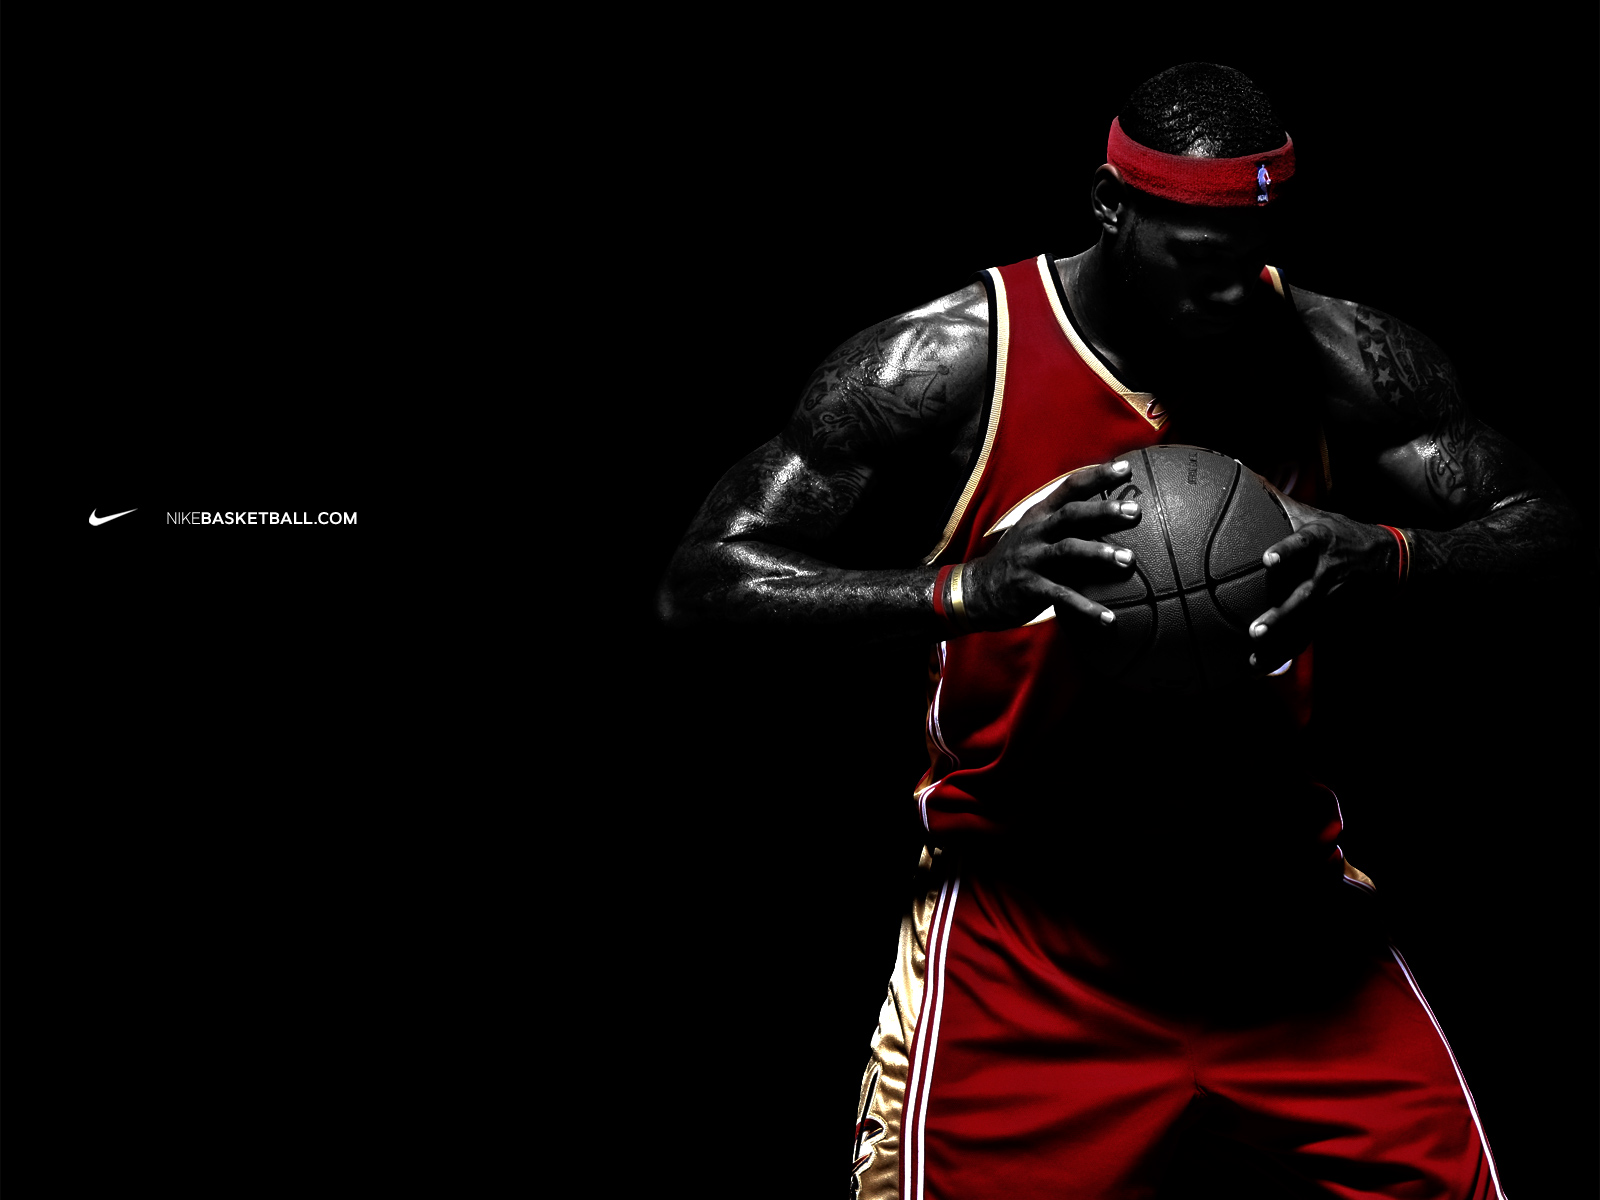 New Lebron Six King James Wallpaper From Nike